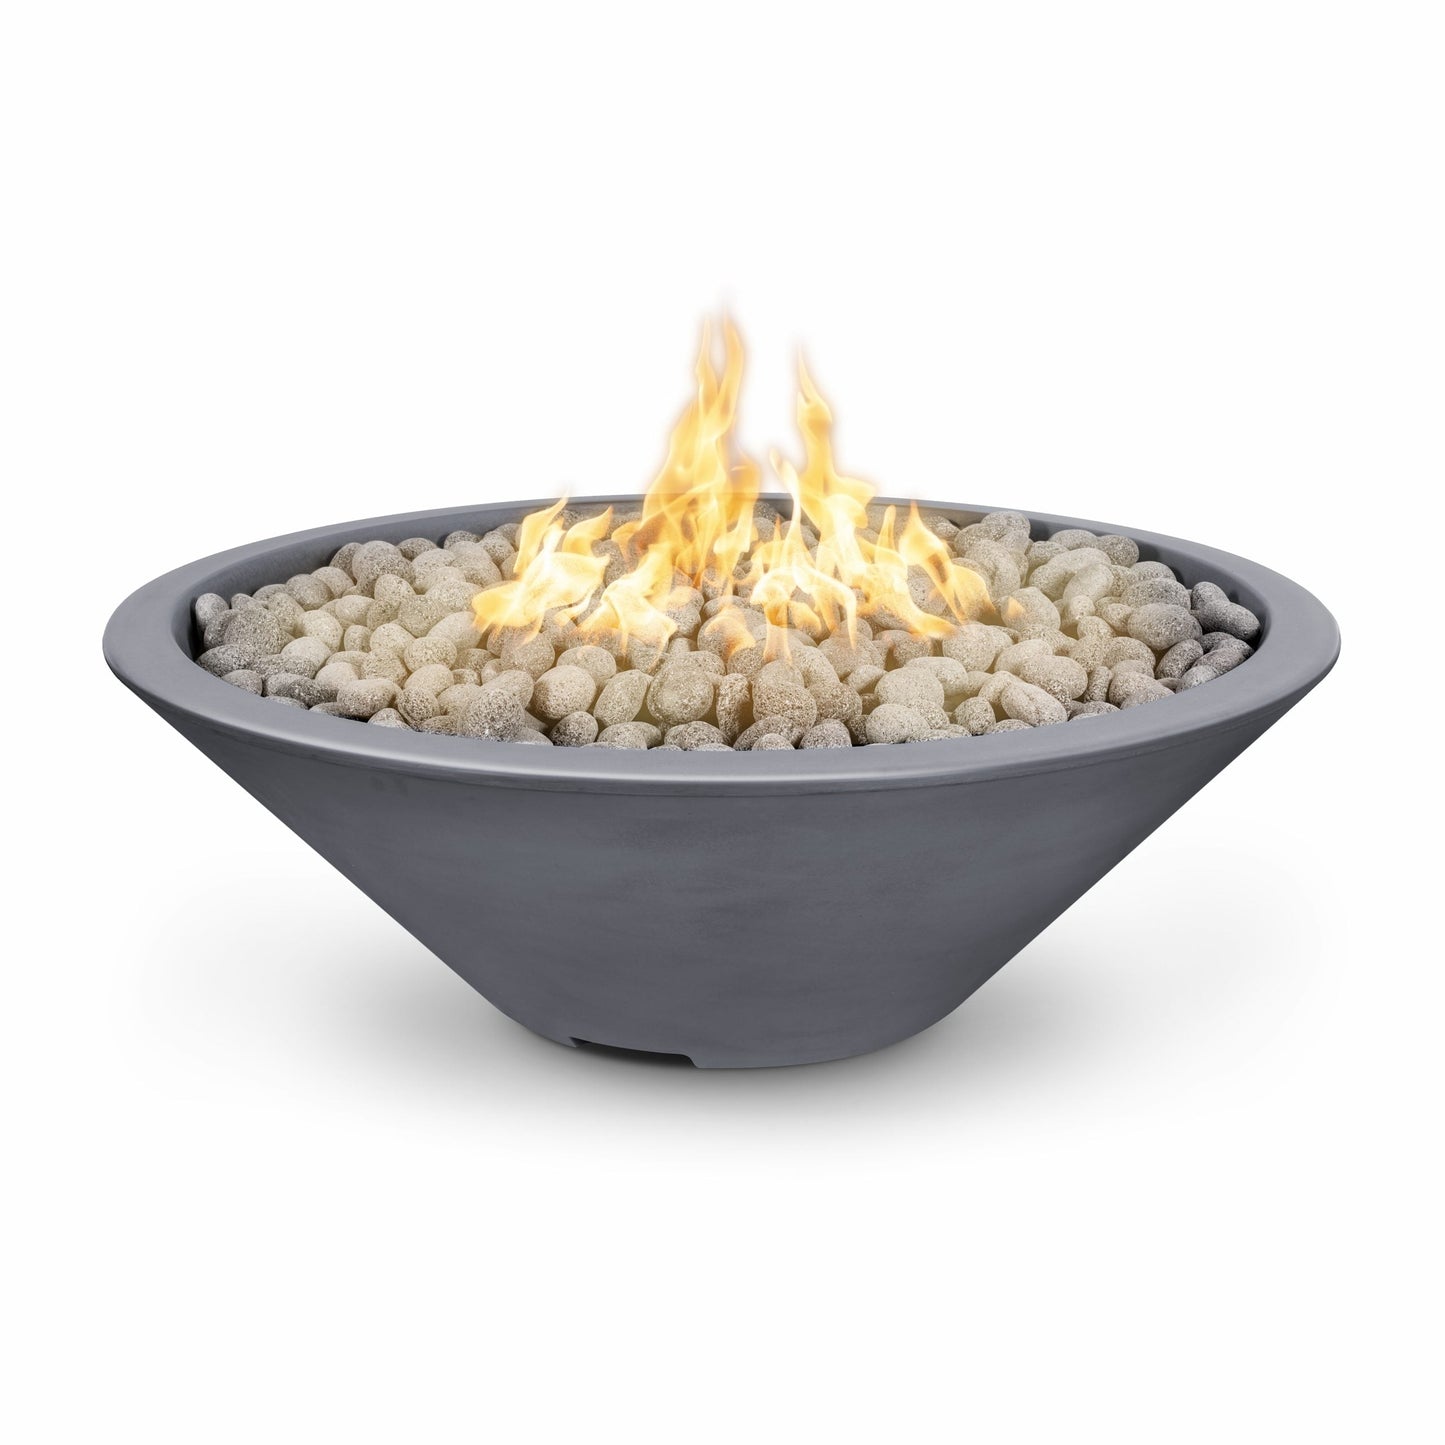 The Outdoor Plus Round Cazo 48" Java Powder Coated Metal Natural Gas Fire Pit with Match Lit with Flame Sense Ignition